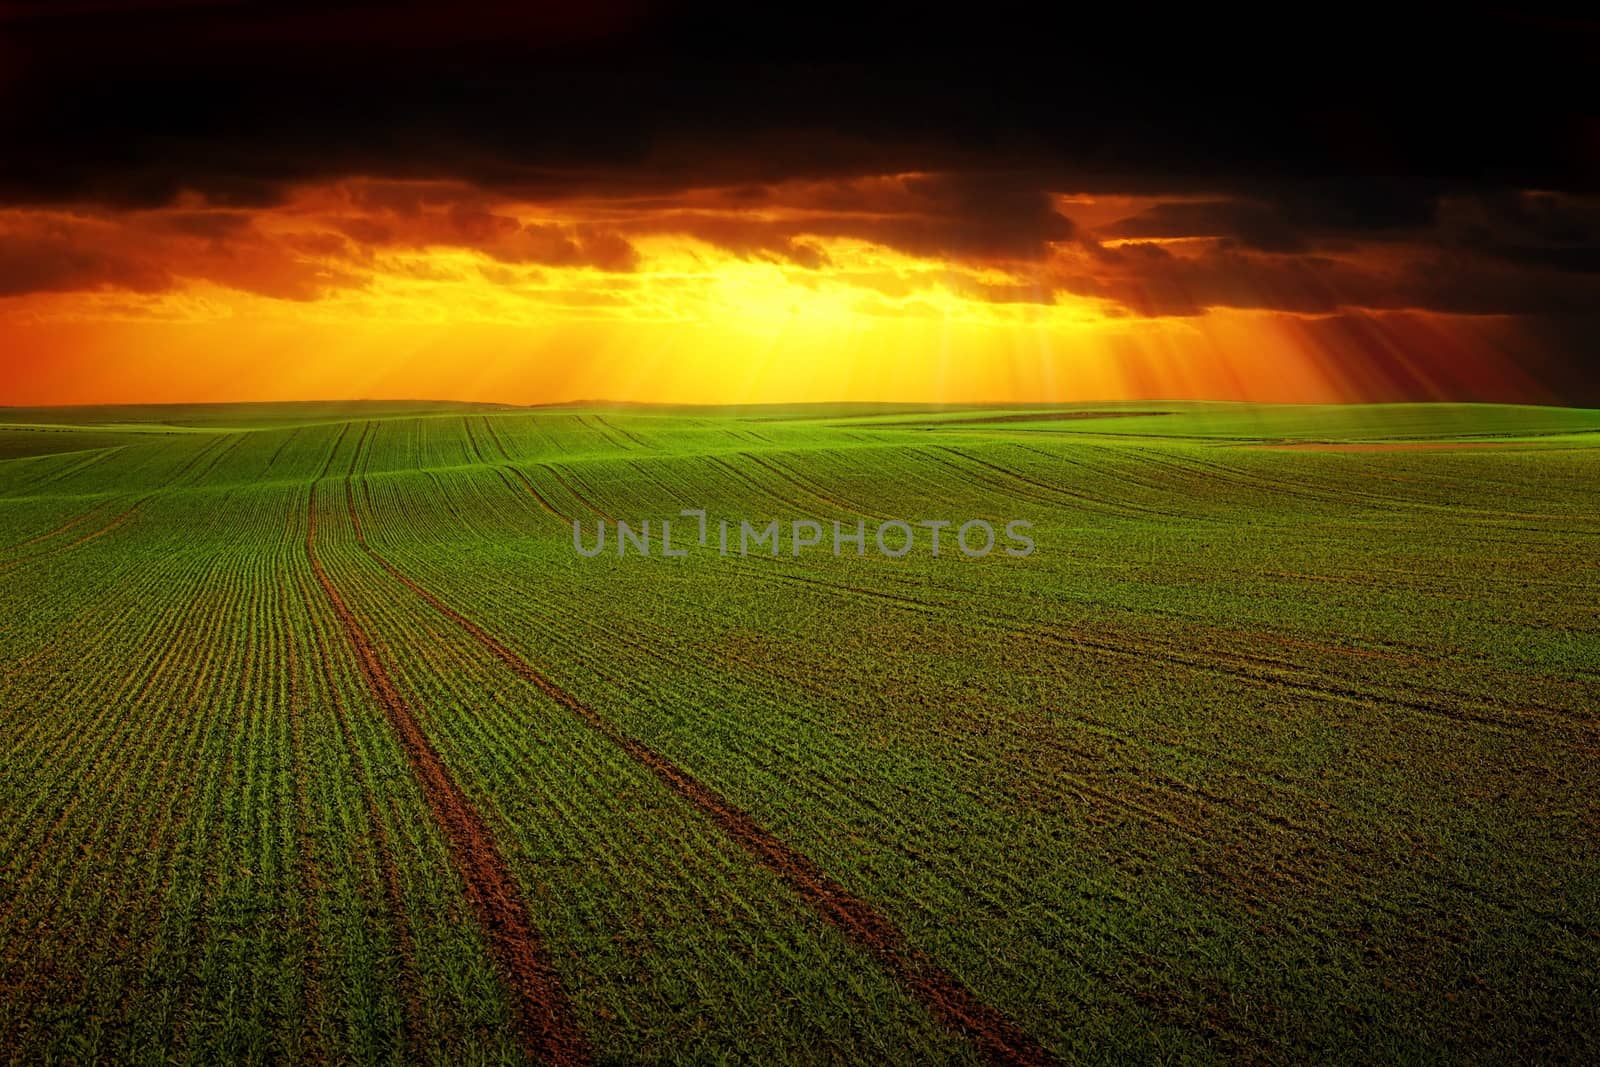 Storm dark clouds and light over field with green grass by Roman1030